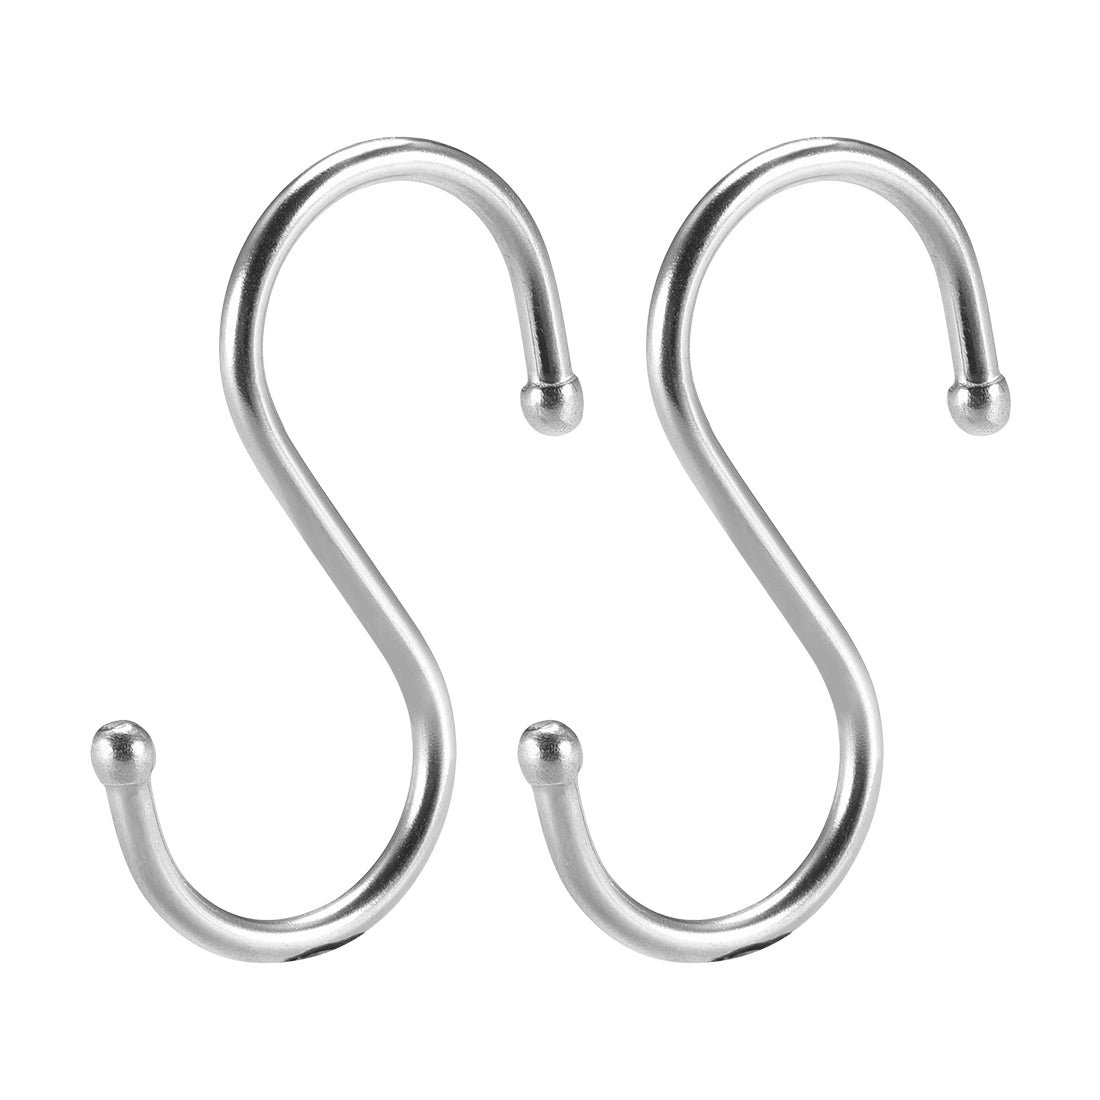 uxcell Uxcell Stainless Steel S Hooks 2" S Shaped Hook Hangers 2pcs